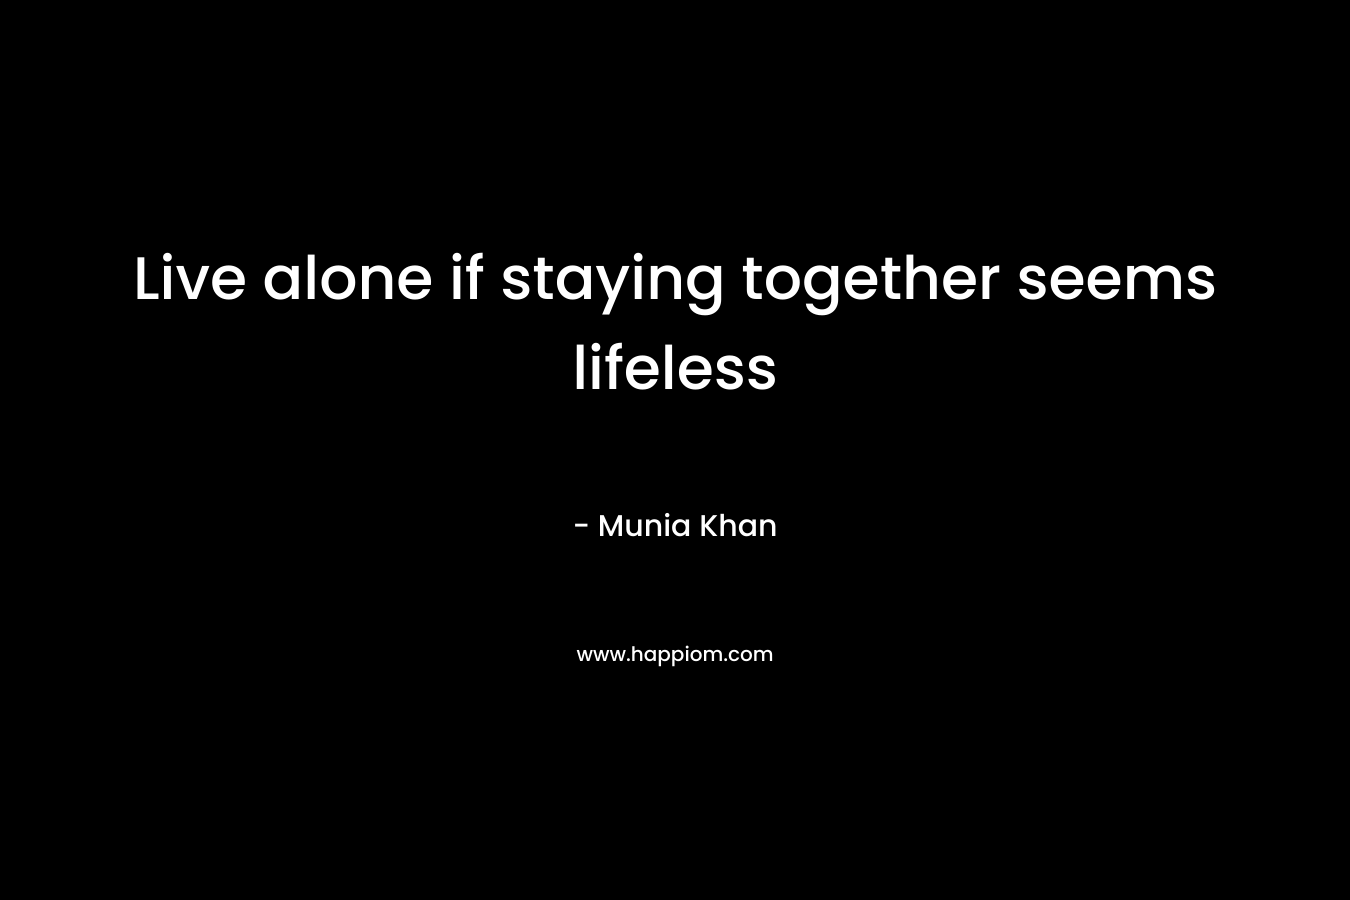 Live alone if staying together seems lifeless